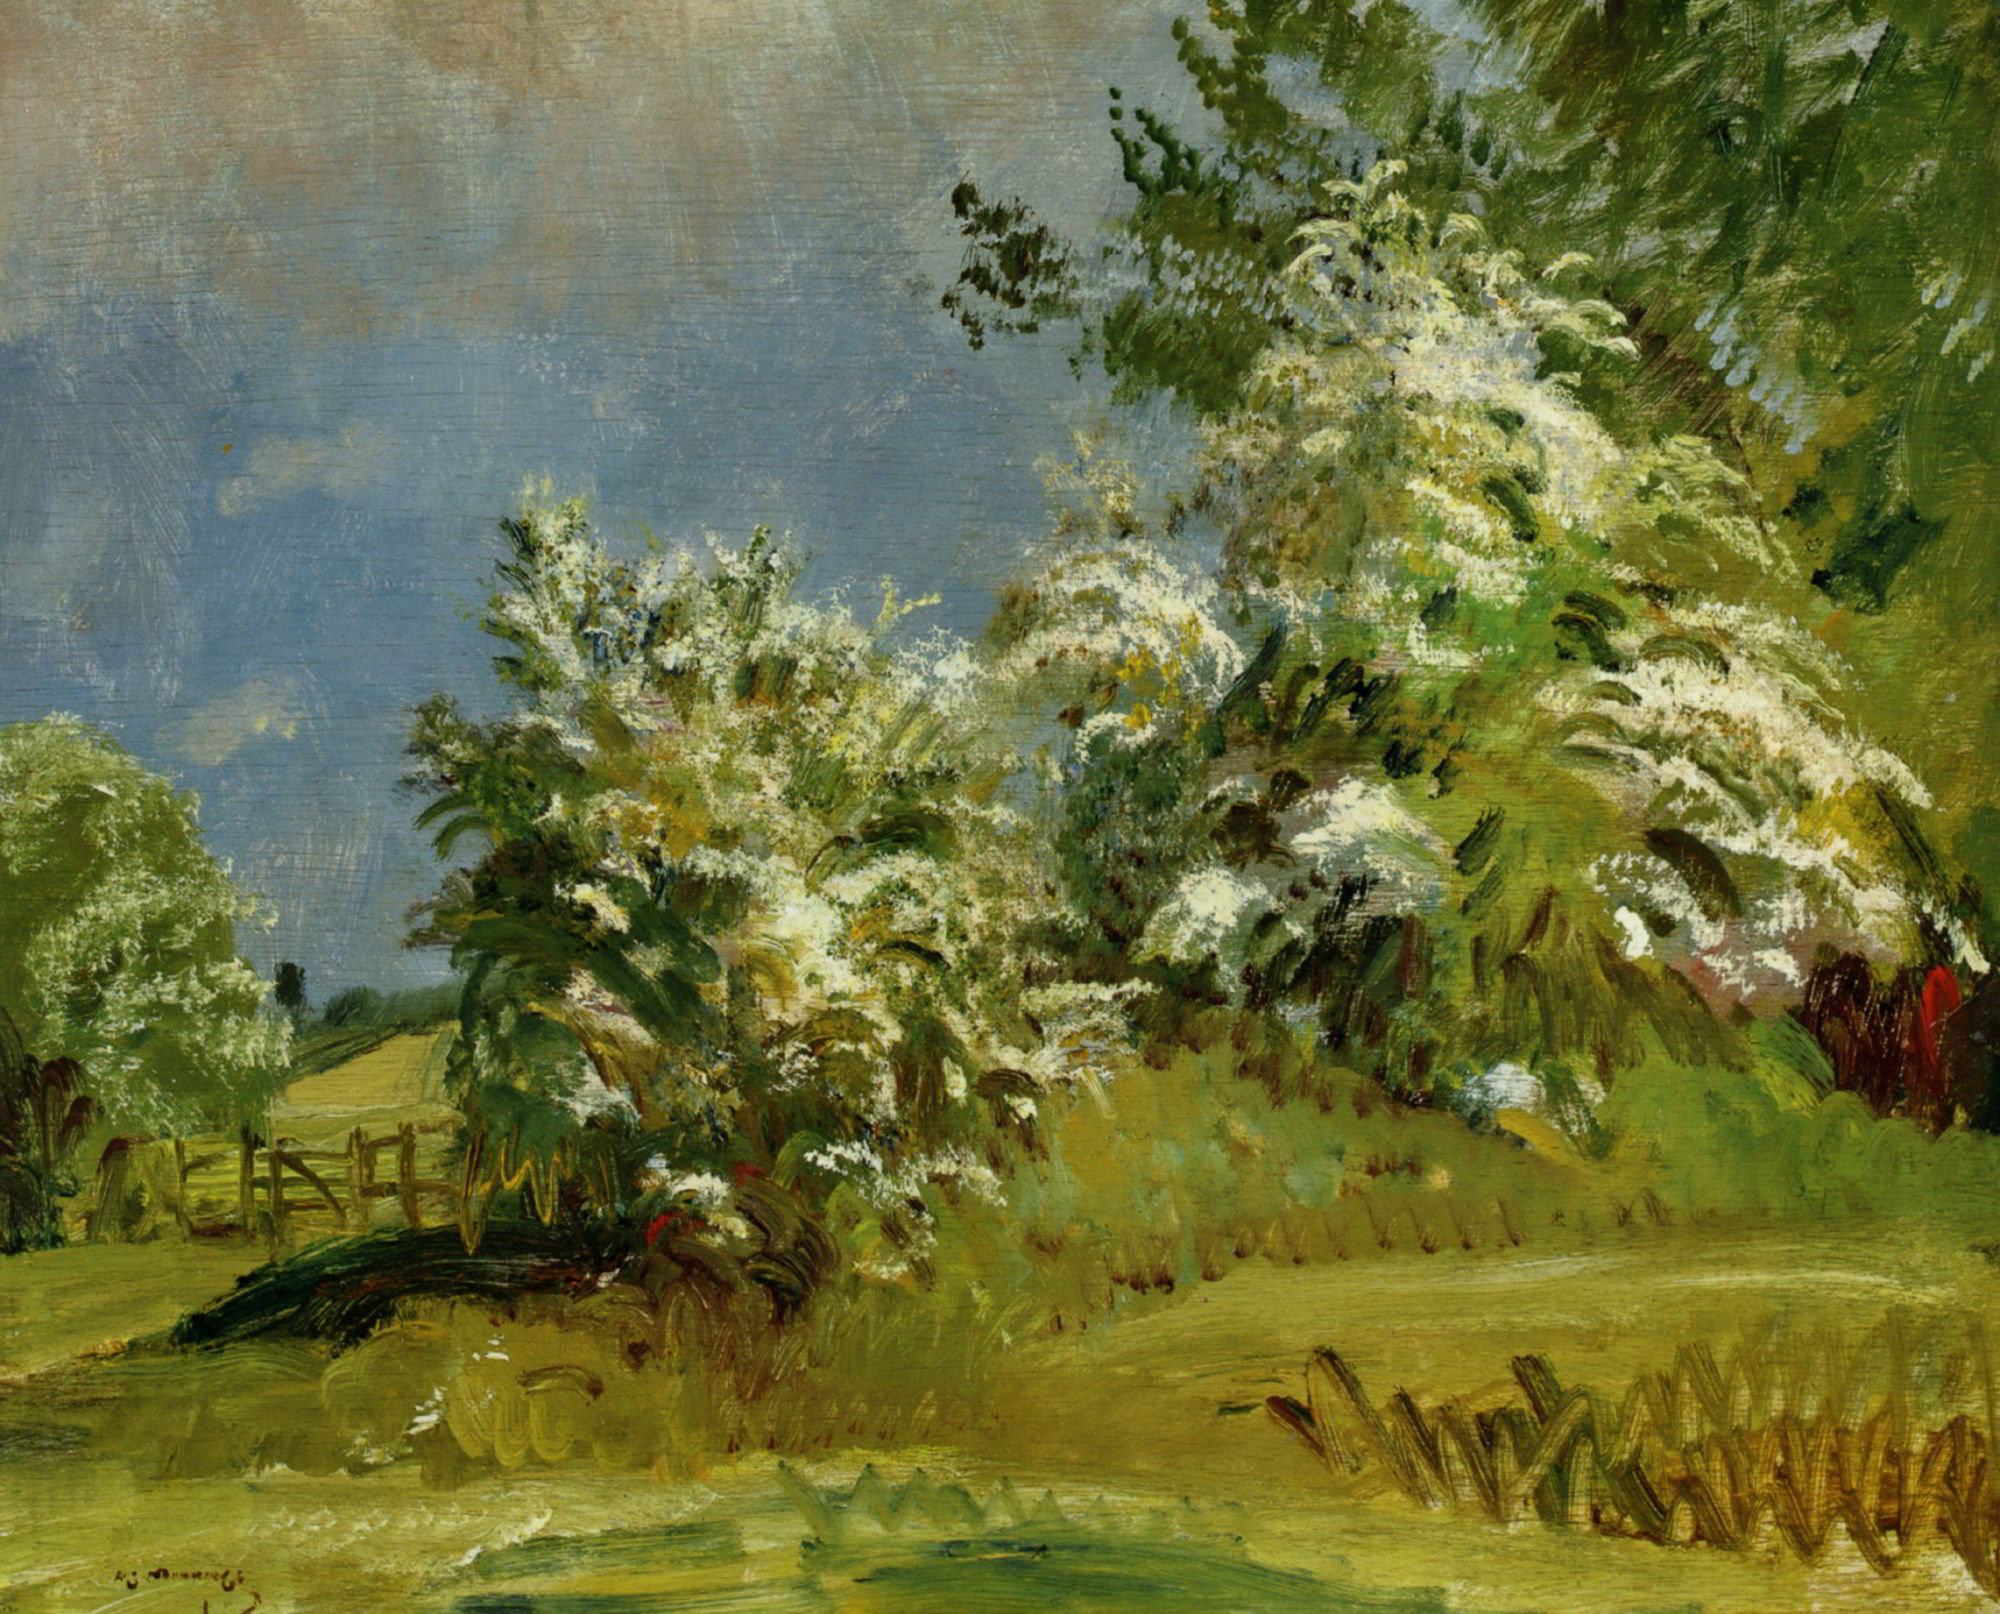 May Blossoms by Sir Alfred James Munnings